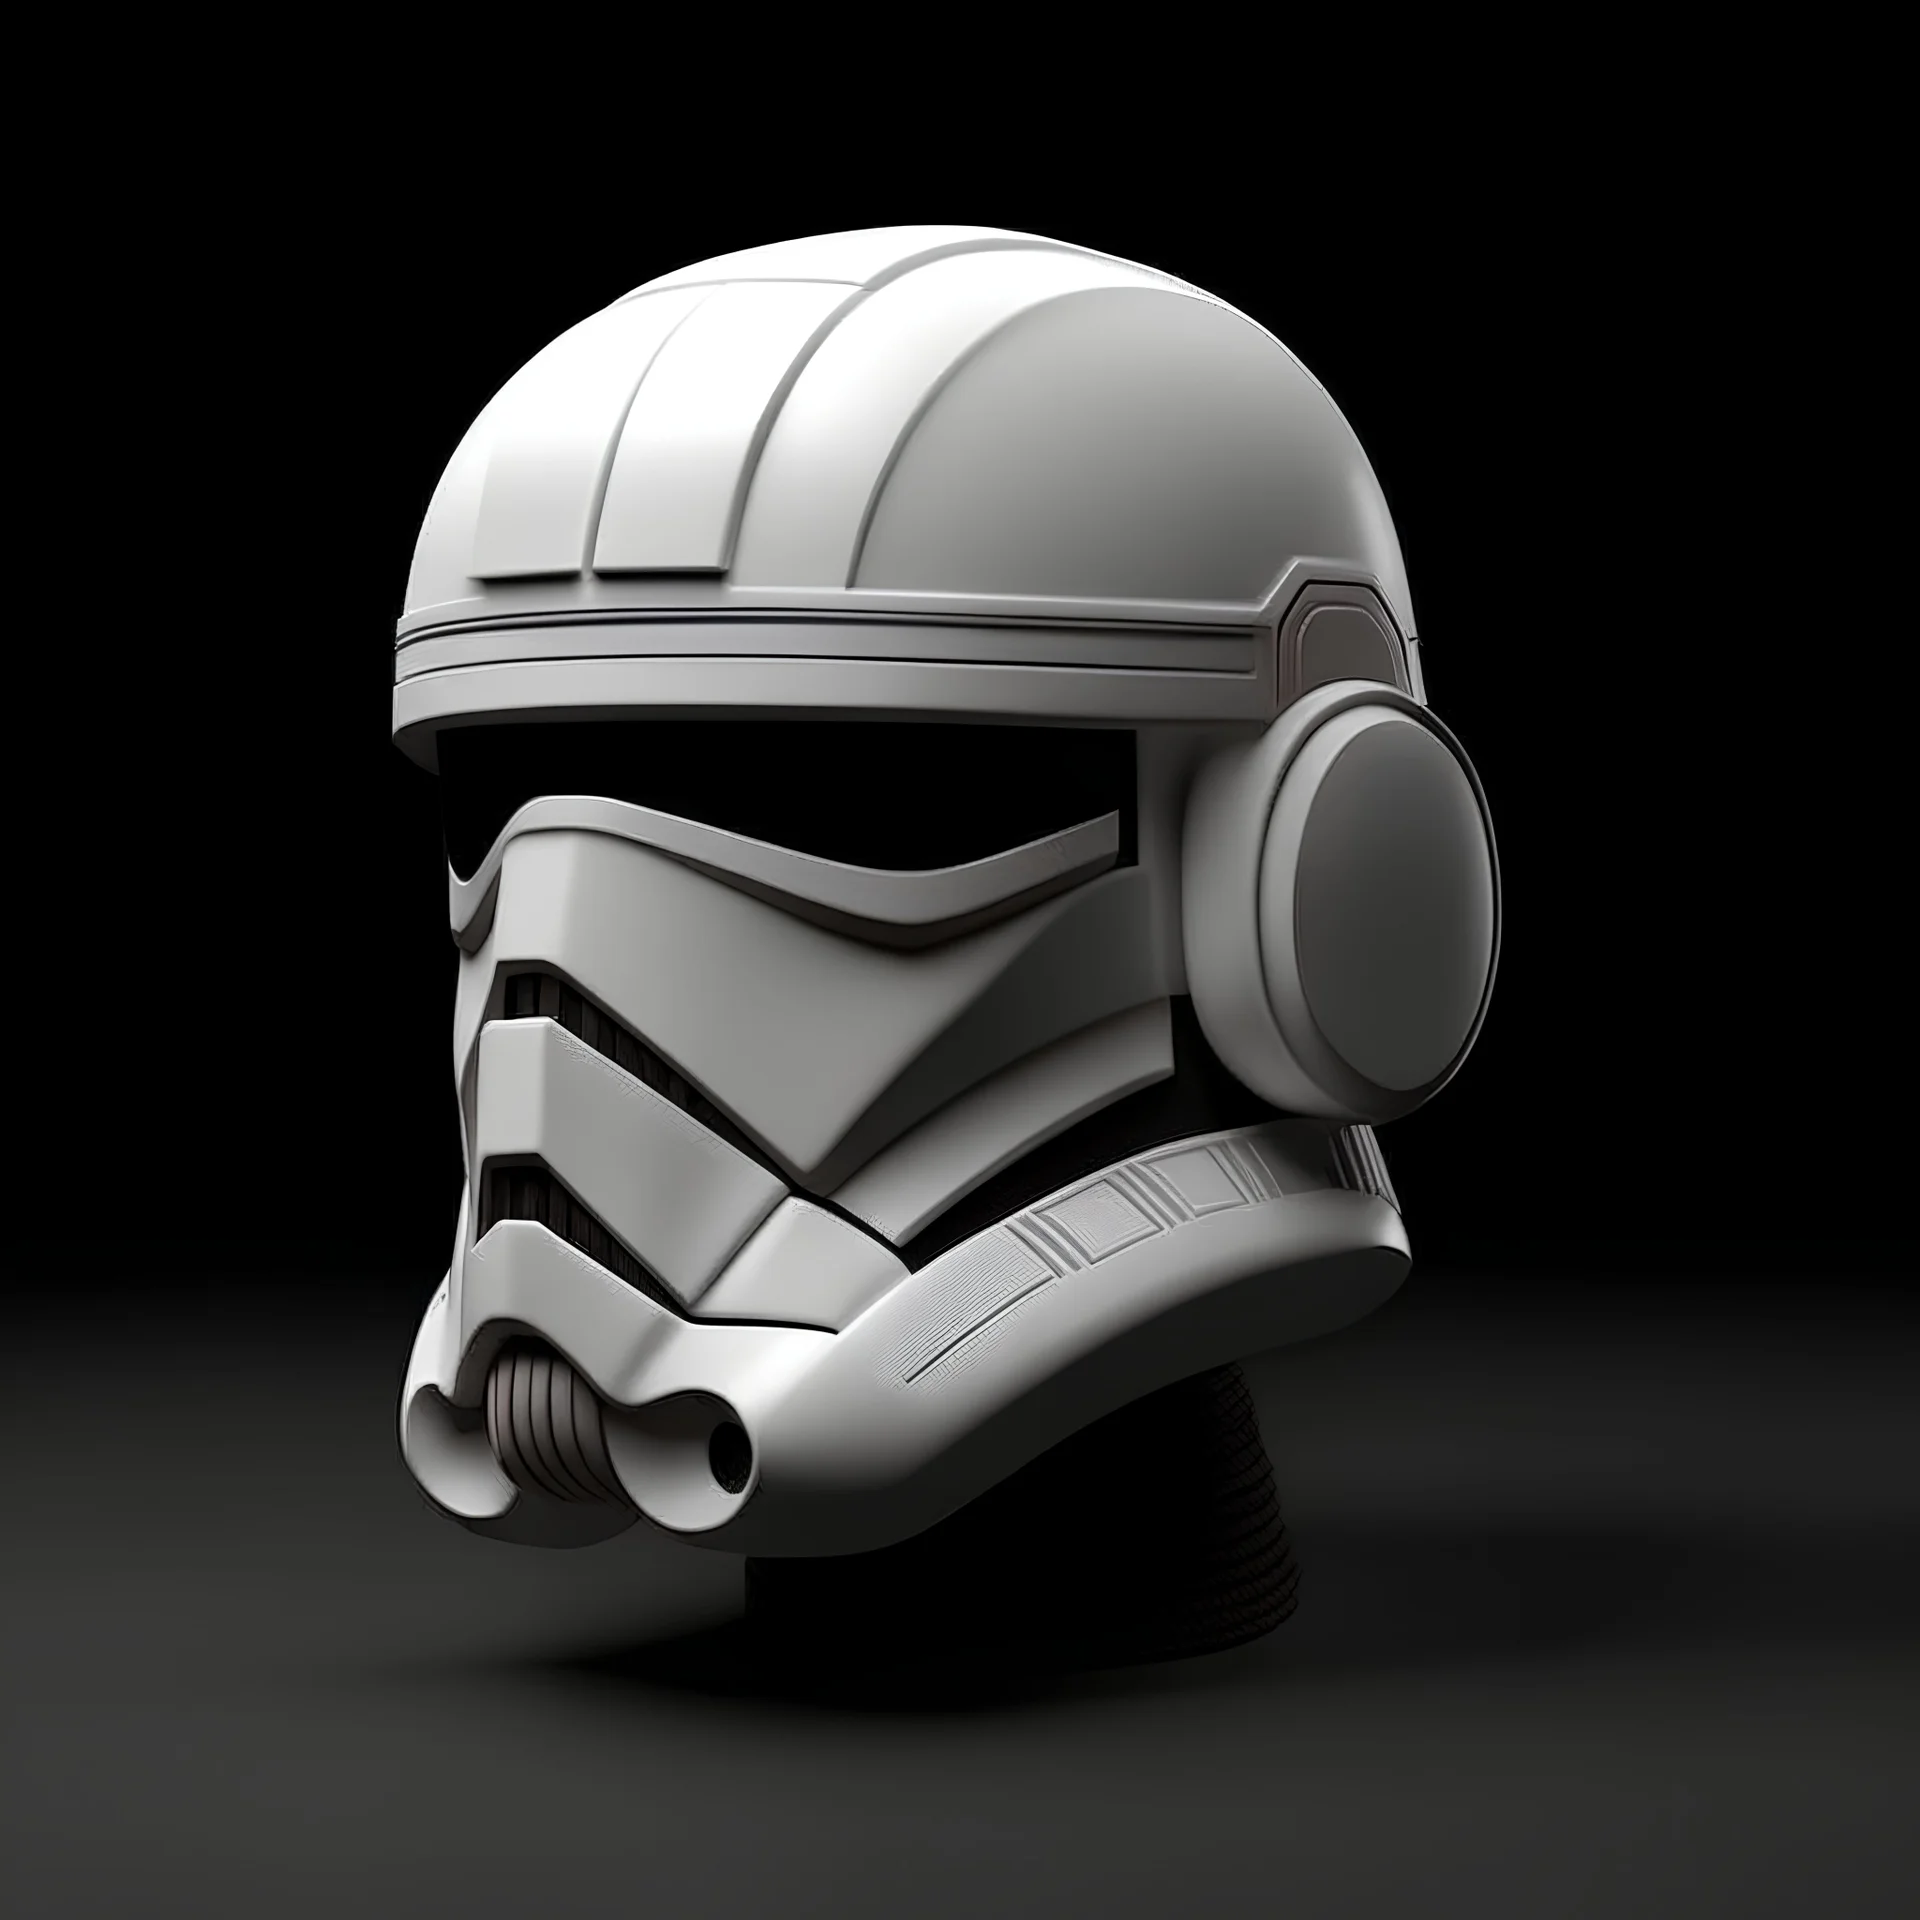 Create a 1024x1024 square image featuring a 2D front view of a helmet inspired by the iconic space trooper from the Star Wars series. The helmet should be rendered in a minimalist and geometric style, highlighting its sleek design with a monochrome color palette. The helmet should be centrally placed, taking up most of the frame, with a focus on the symmetrical design of the eye slits, mouth grill, and the clean, curved lines that define its form. The background should be a flat white color to e